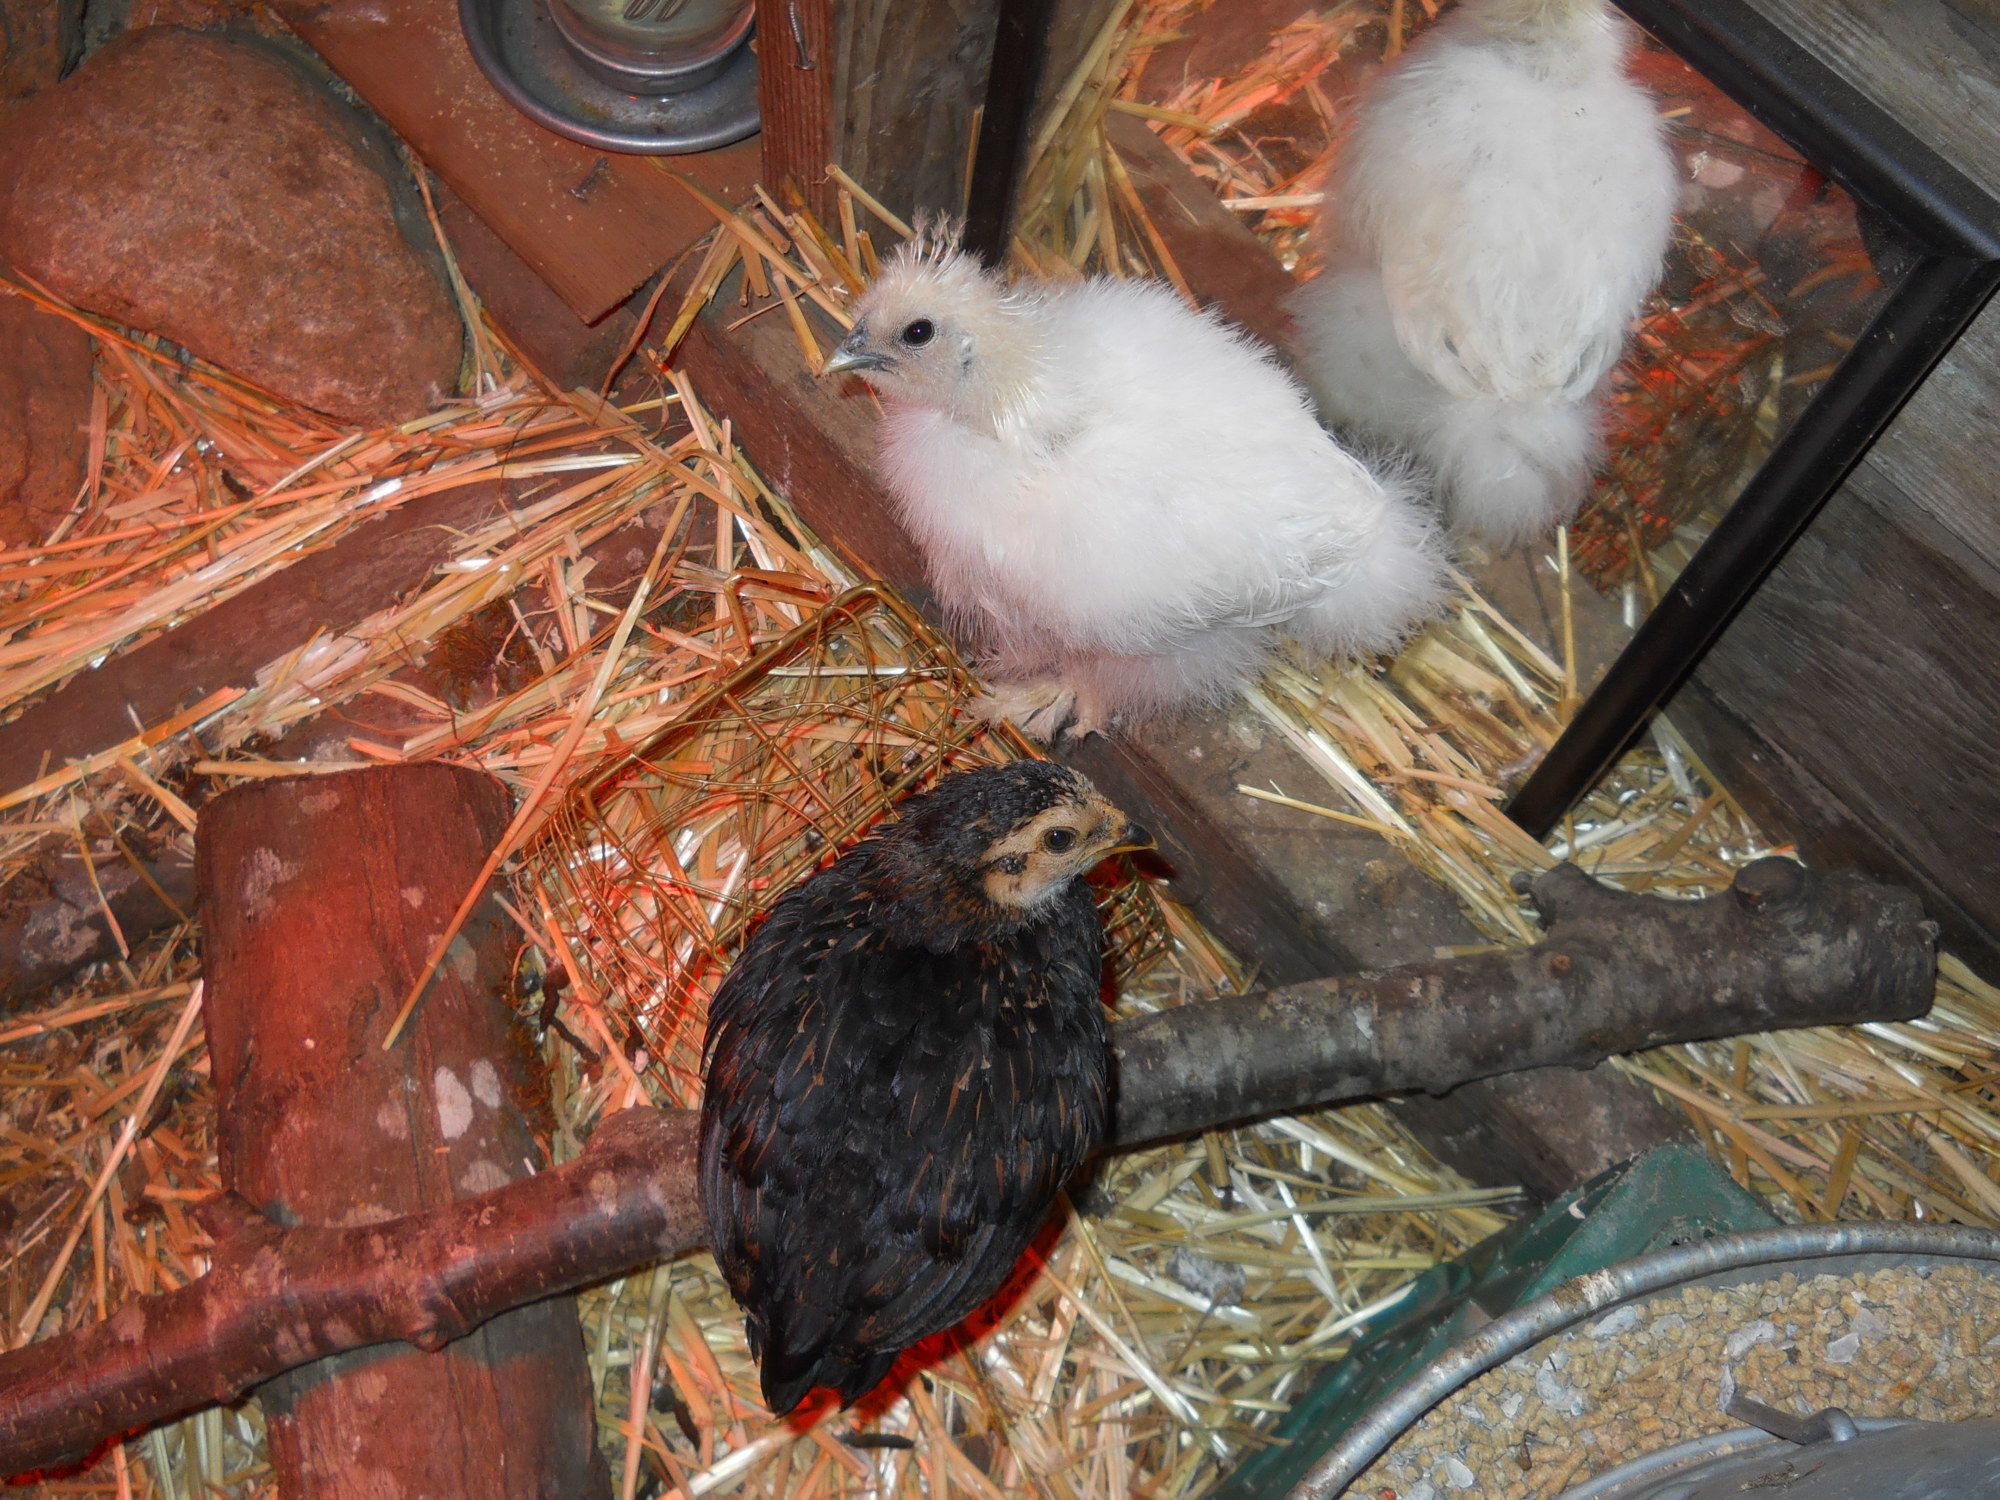 They really enjoy being in thier nursery area in the coop and have gained a lot of confidence. The older girls don't bother them much and they are trying to follow them around but still keep to themselves... They are both very friendly and spoiled... The brown and black one grooms itself all day long... the Silkie is very alert and laid back.